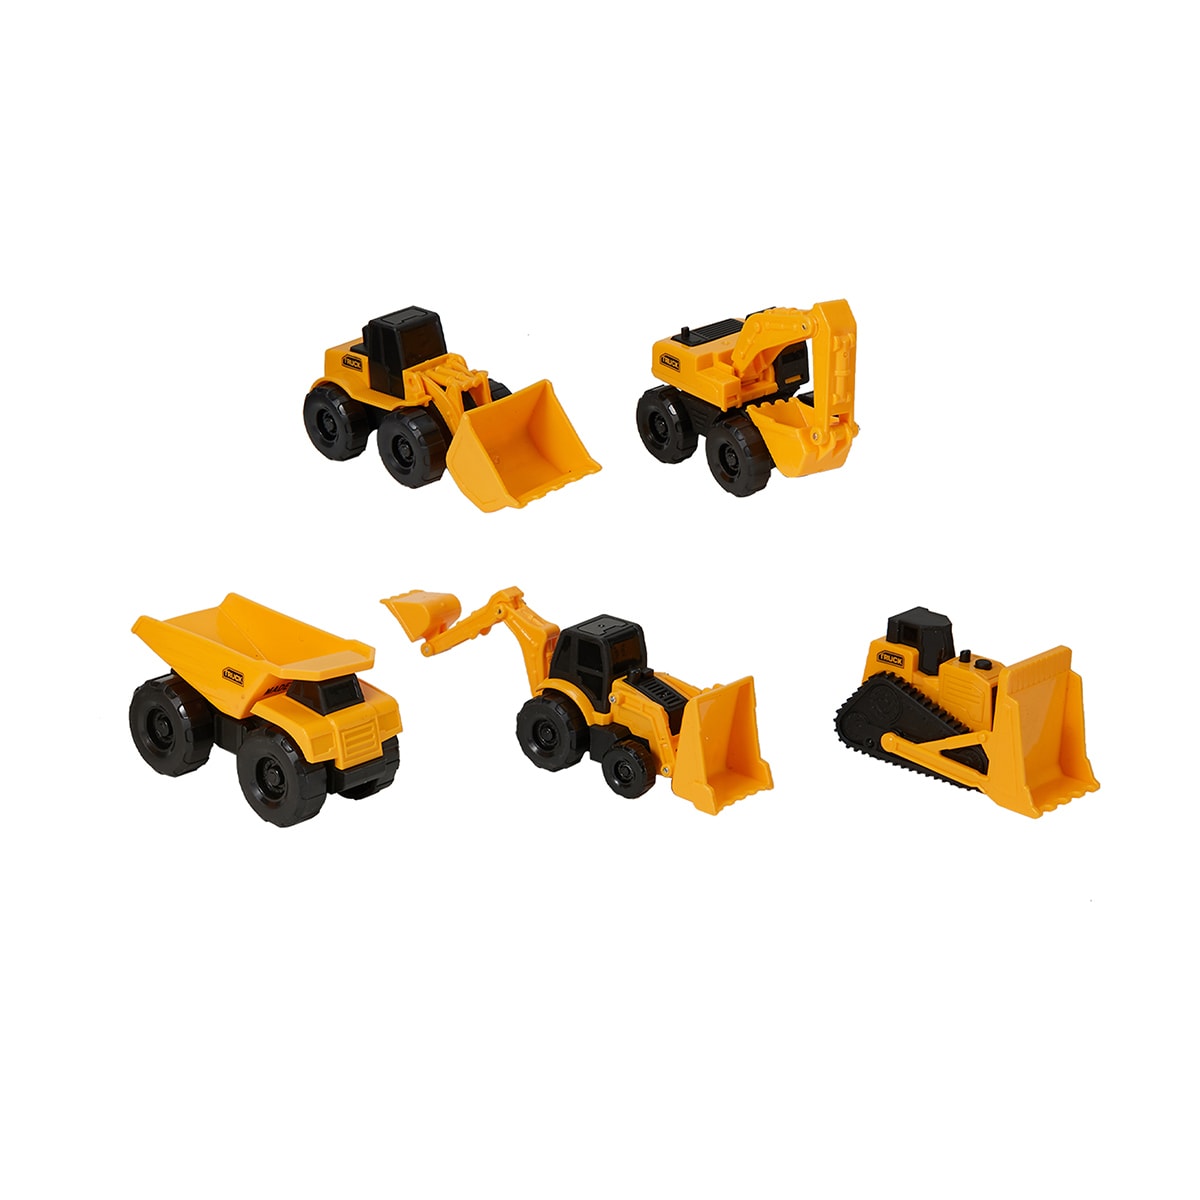 New Classic Toys 11947 Construction Vehicles Pack of 5 